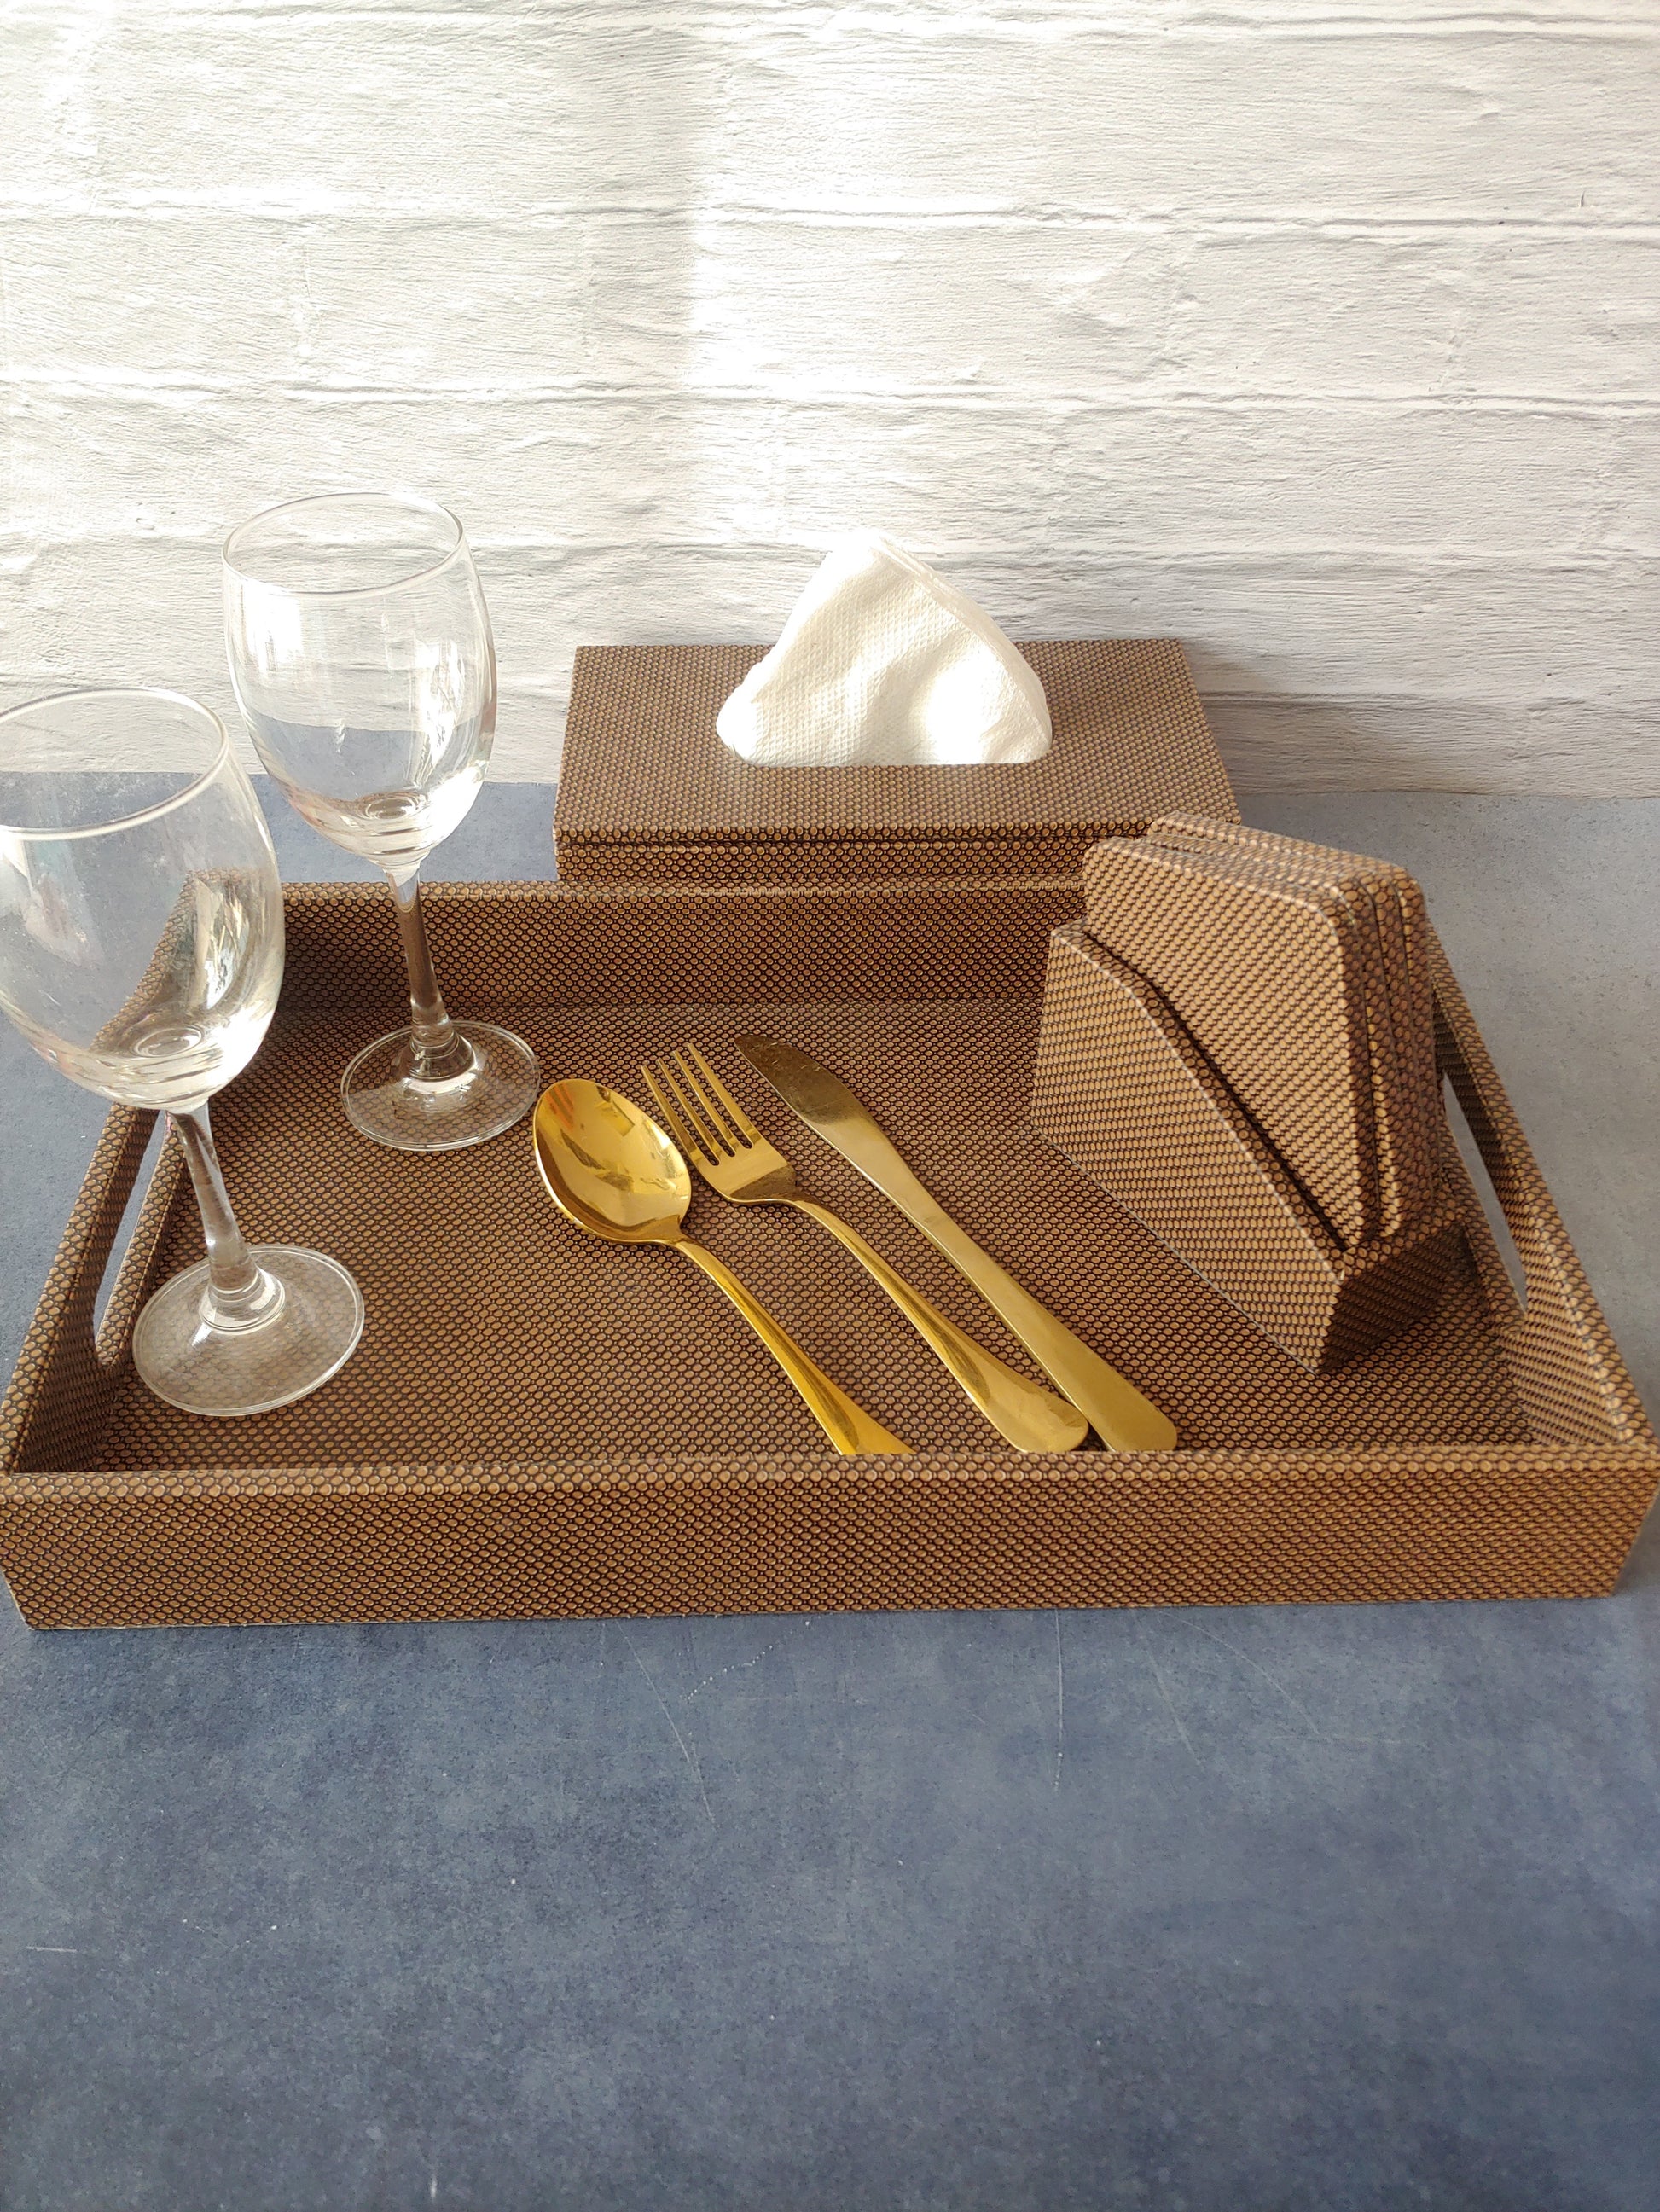 Brown HoneyComb Premium Leather Serving Tray along with tissue holder and coasters